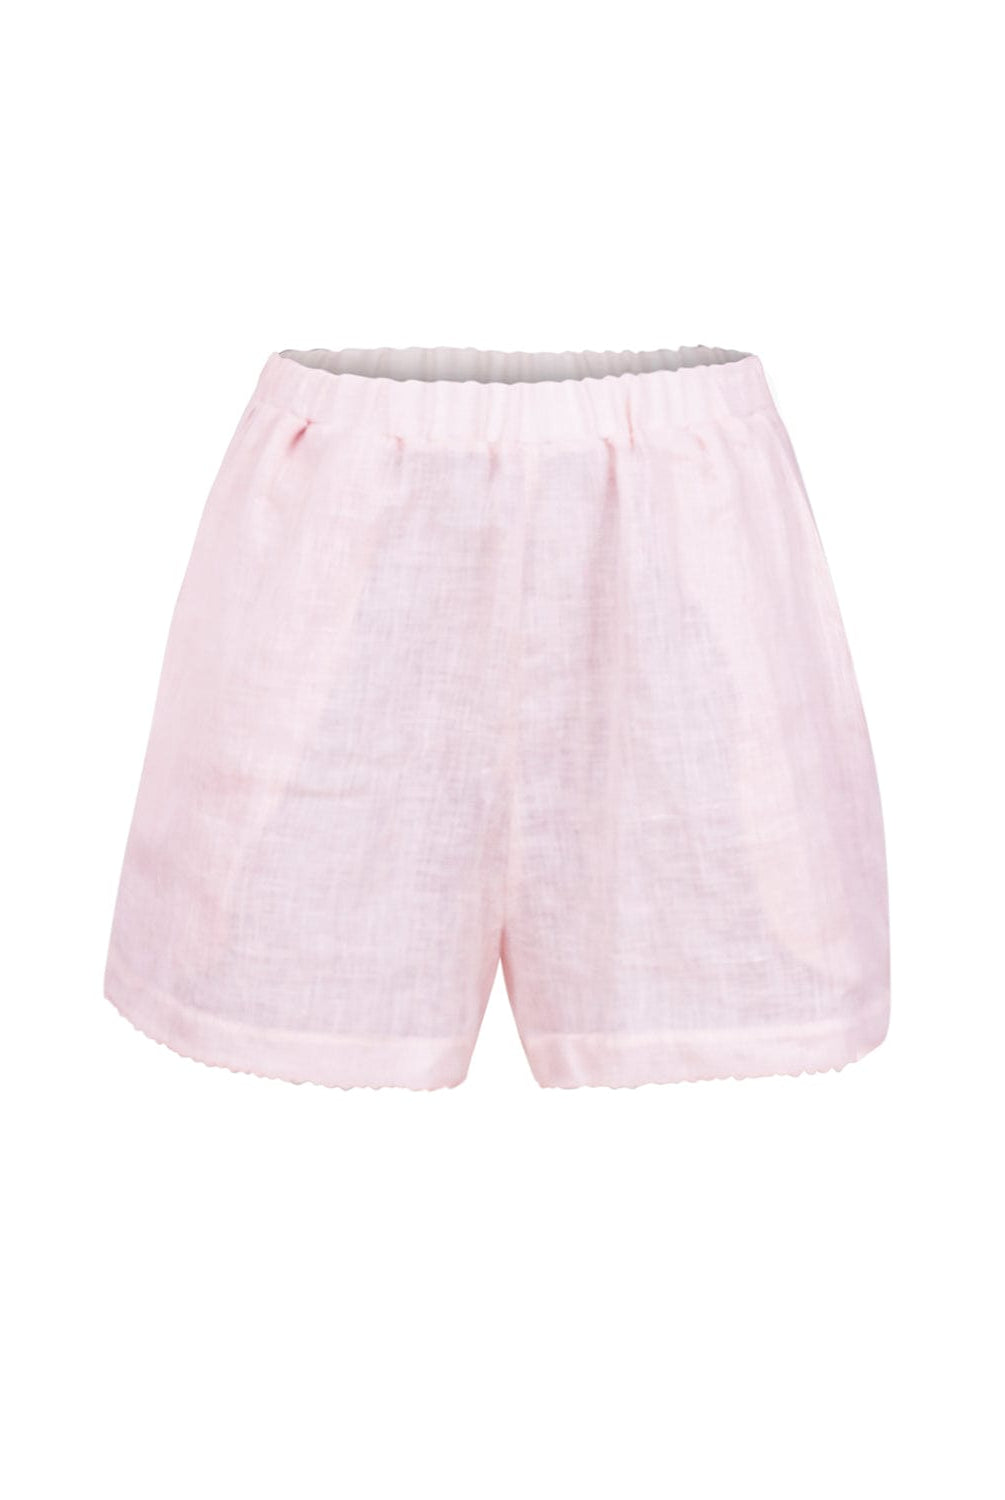 A pair of pink linen scalloped shorts. Featured against a white wall background.